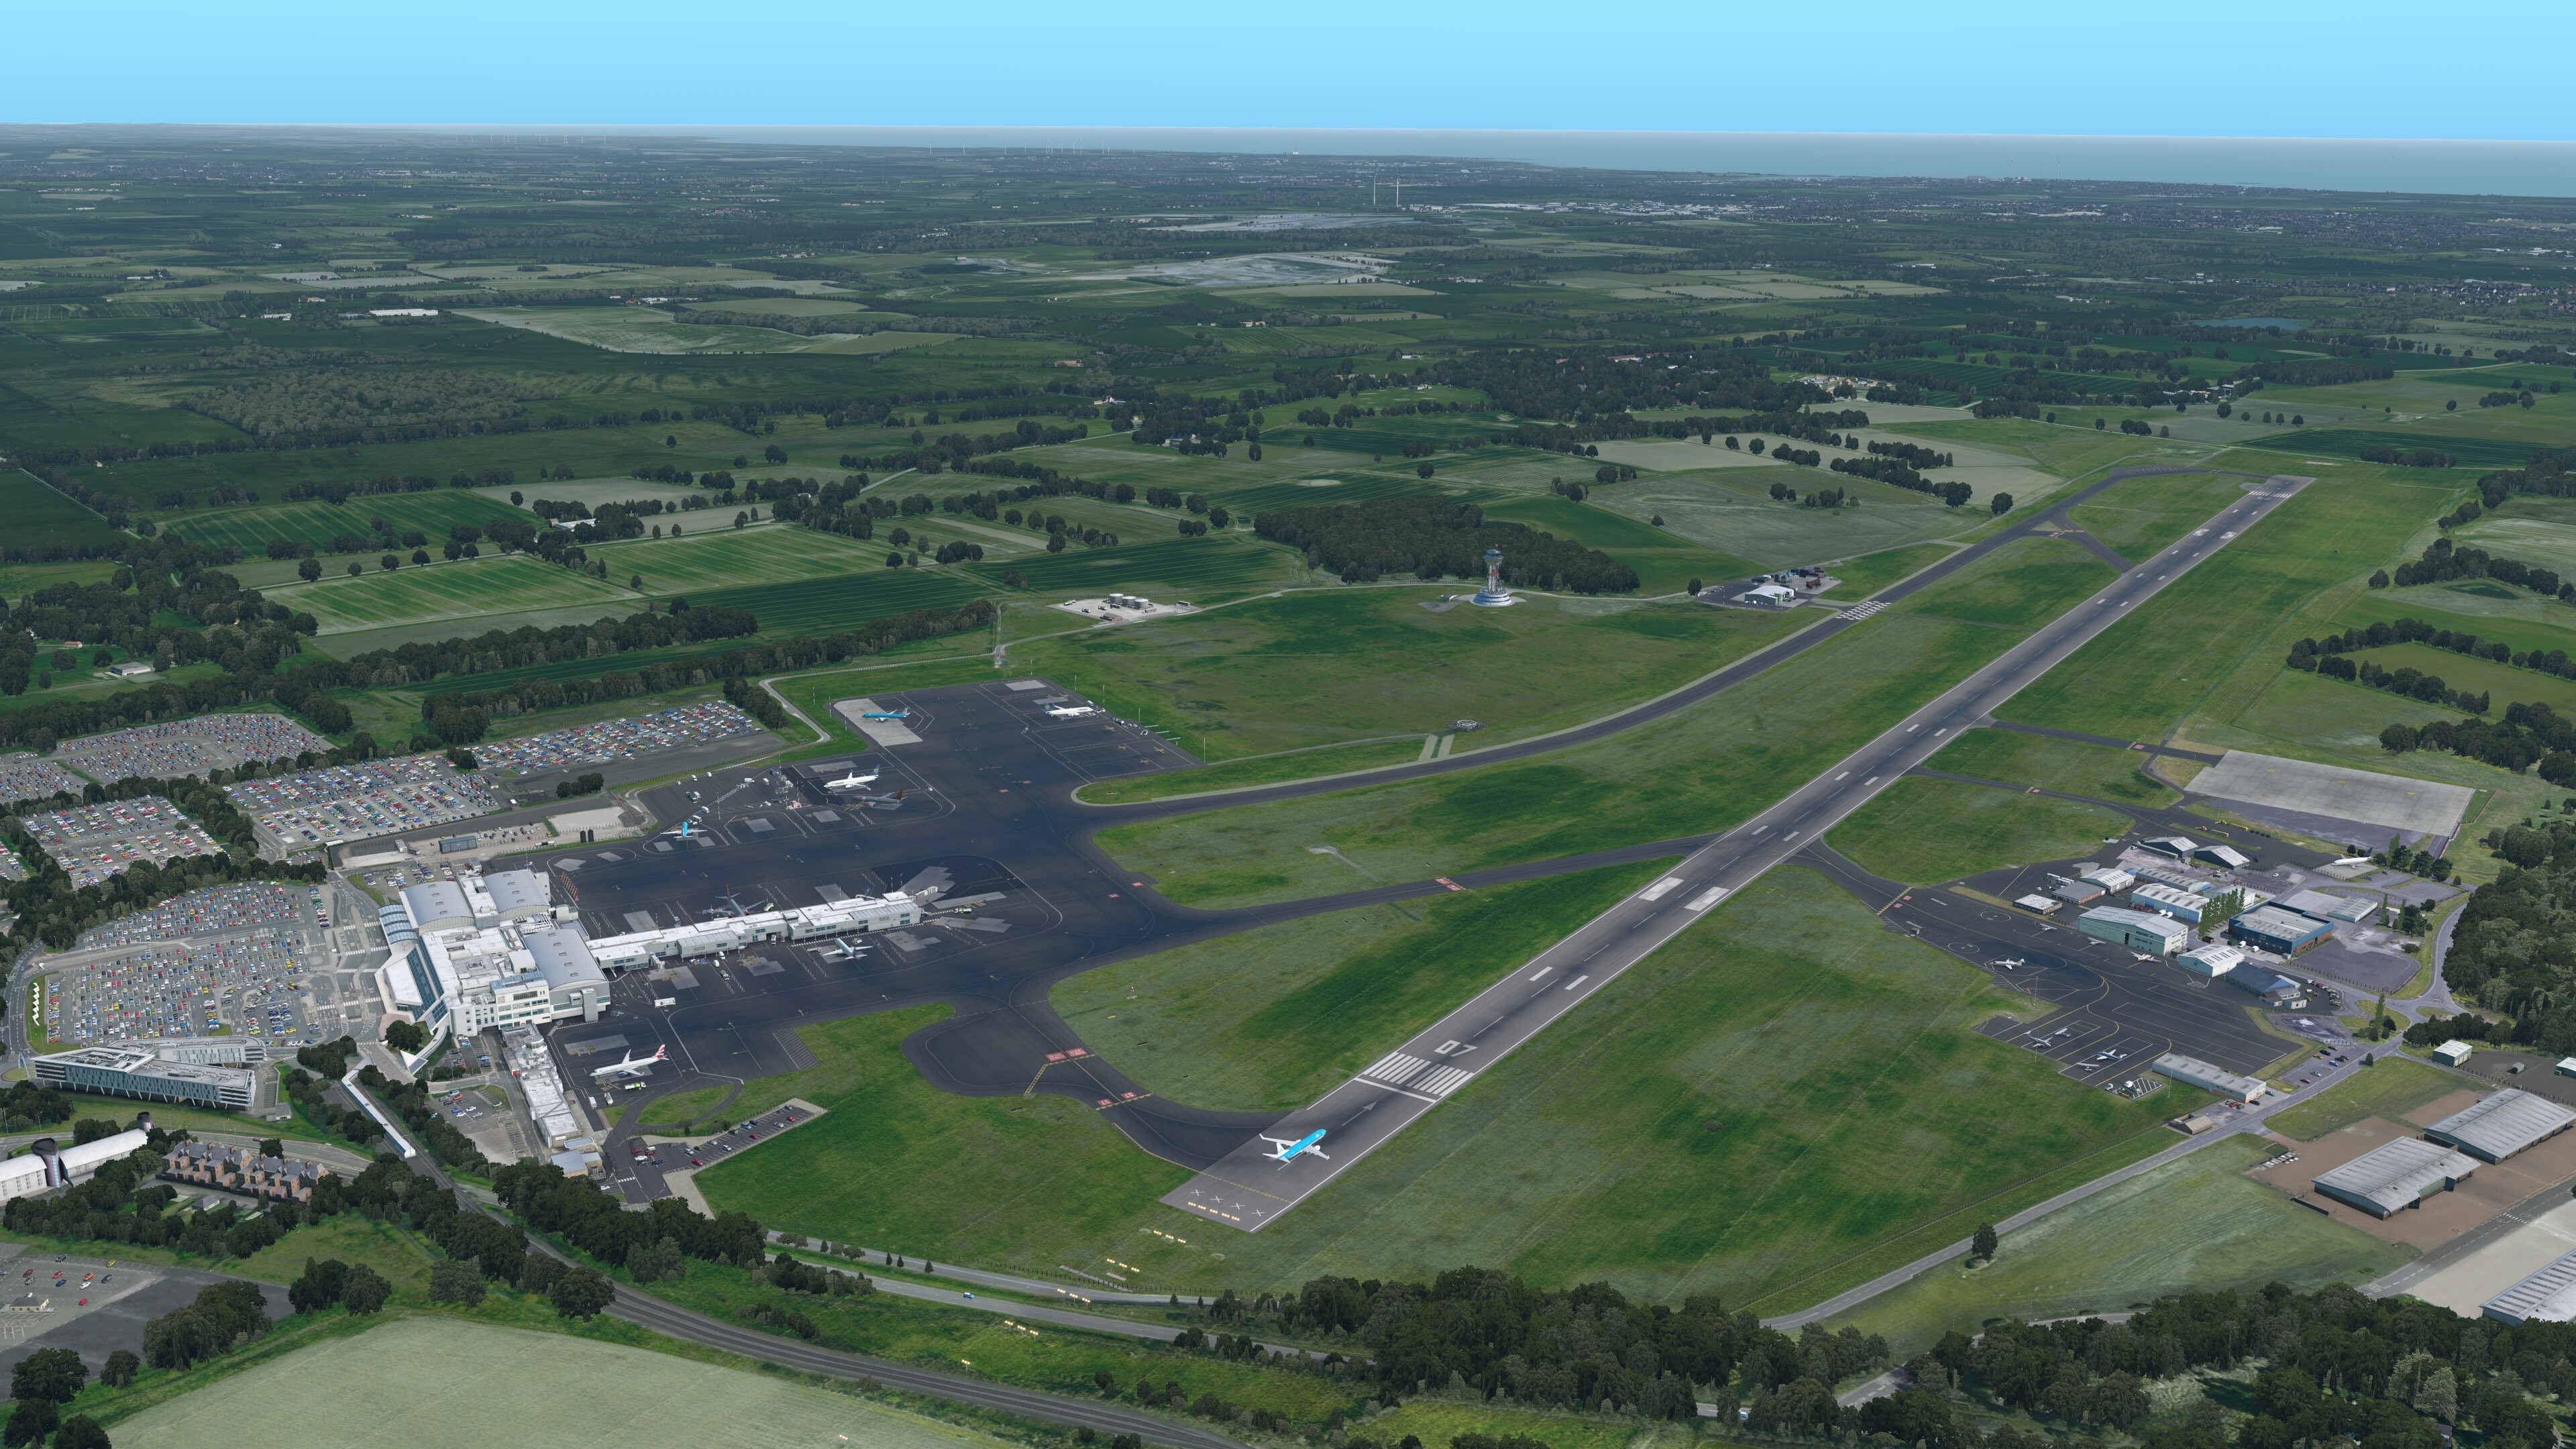 Orbx Releases Newcastle International Airport for XPL